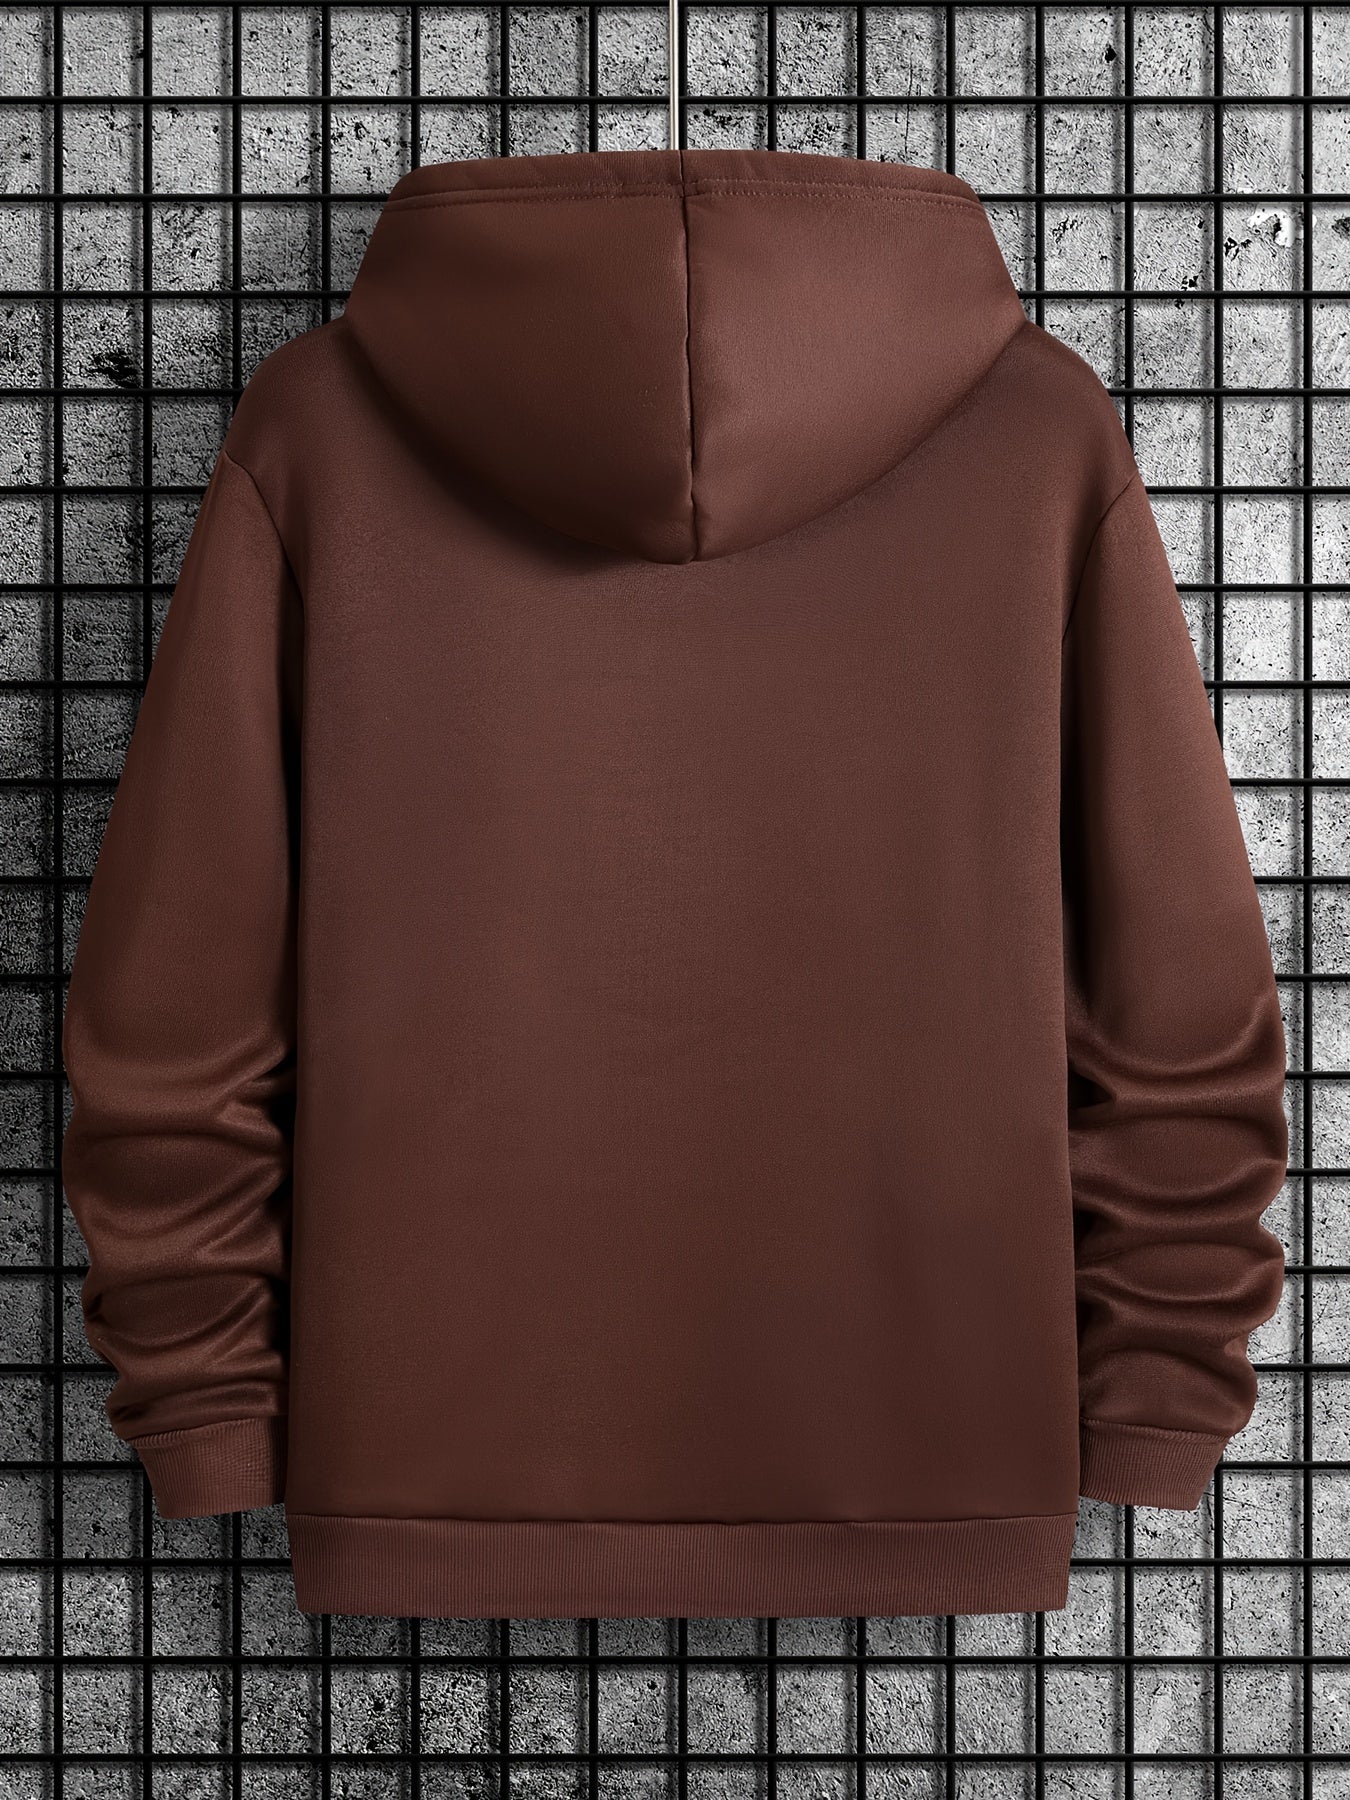 Hoodies For Men, Battery Low Graphic Hoodie, Men's Casual Pullover Hooded Sweatshirt With Kangaroo Pocket For Spring Fall, As Gifts